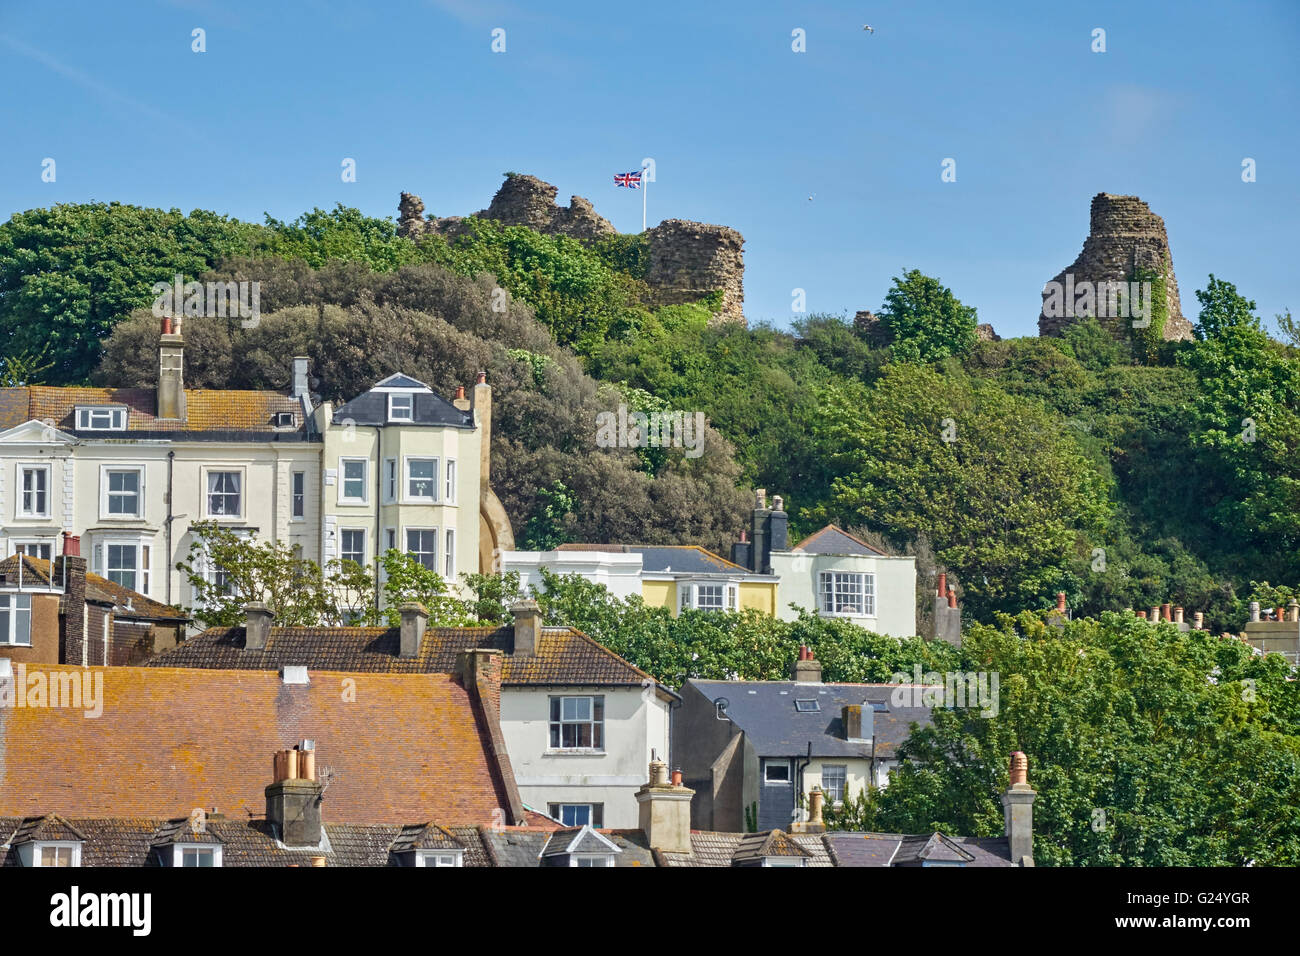 The ruins of Hastings Castle on Castle Hill overlooking the town, East Sussex, England, United Kingdom, UK, GB Stock Photo